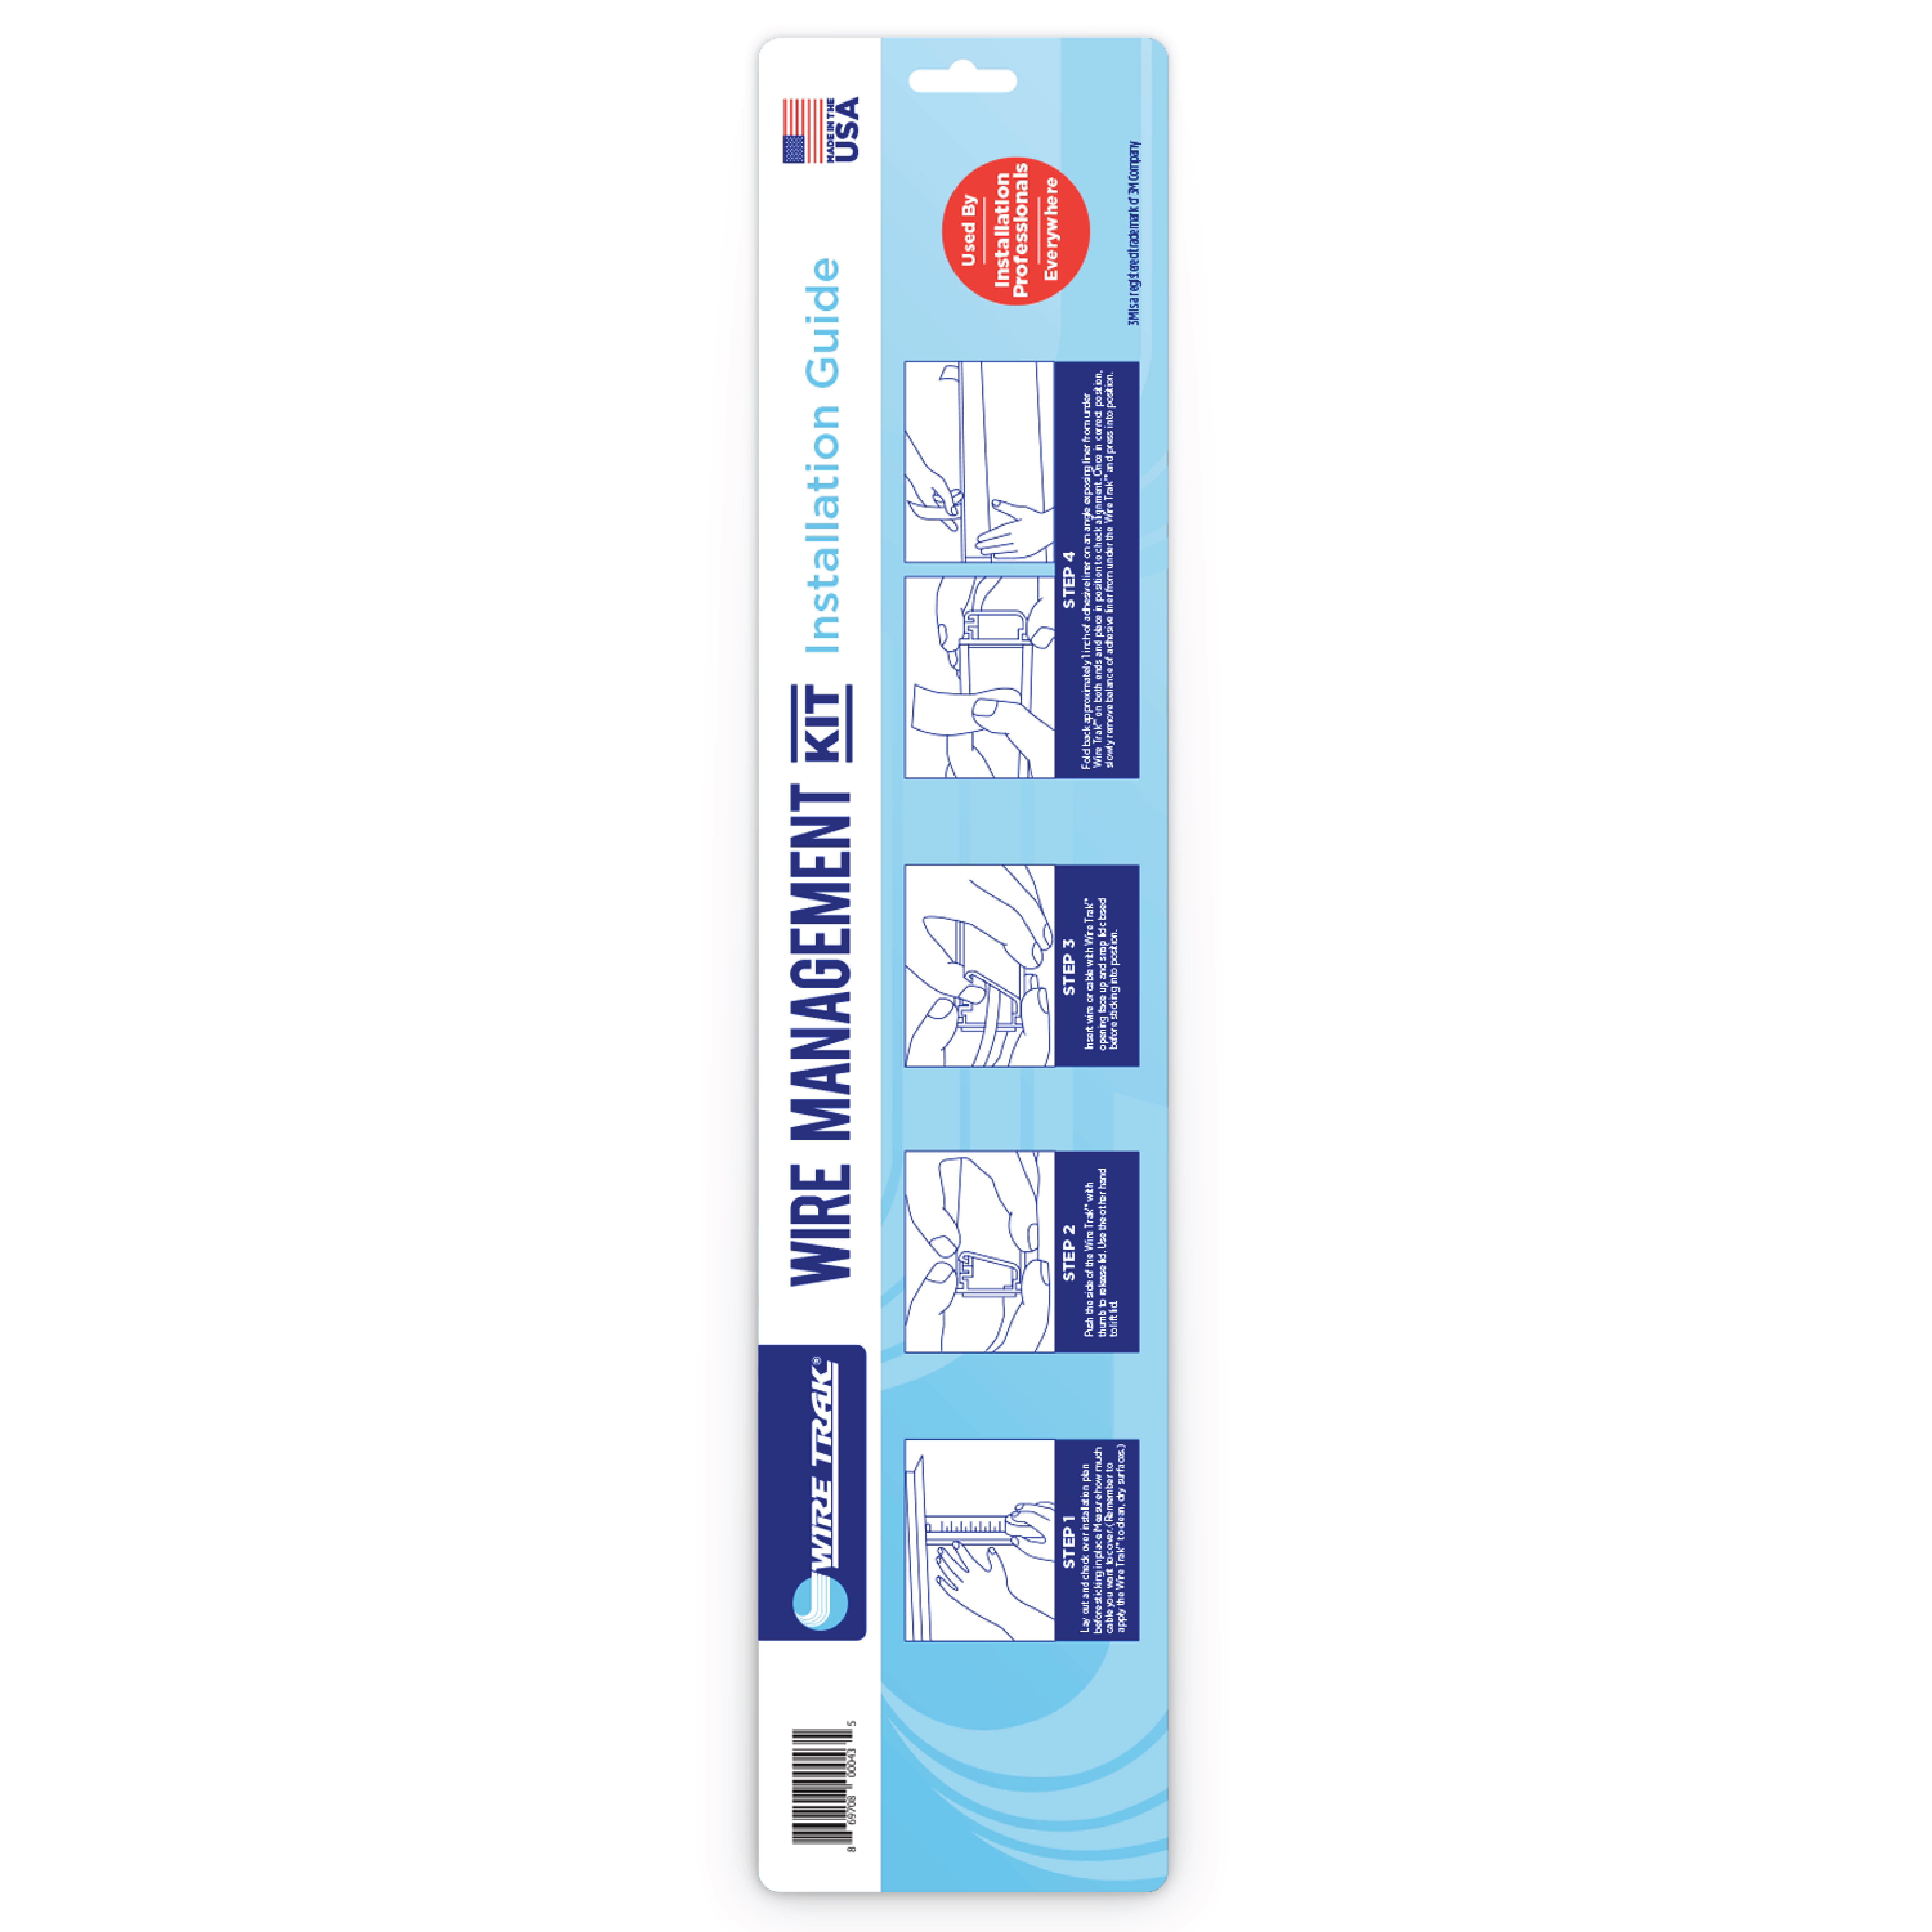 Wire Trak Micro Manager Wire Management Kit, Removable Adhesive